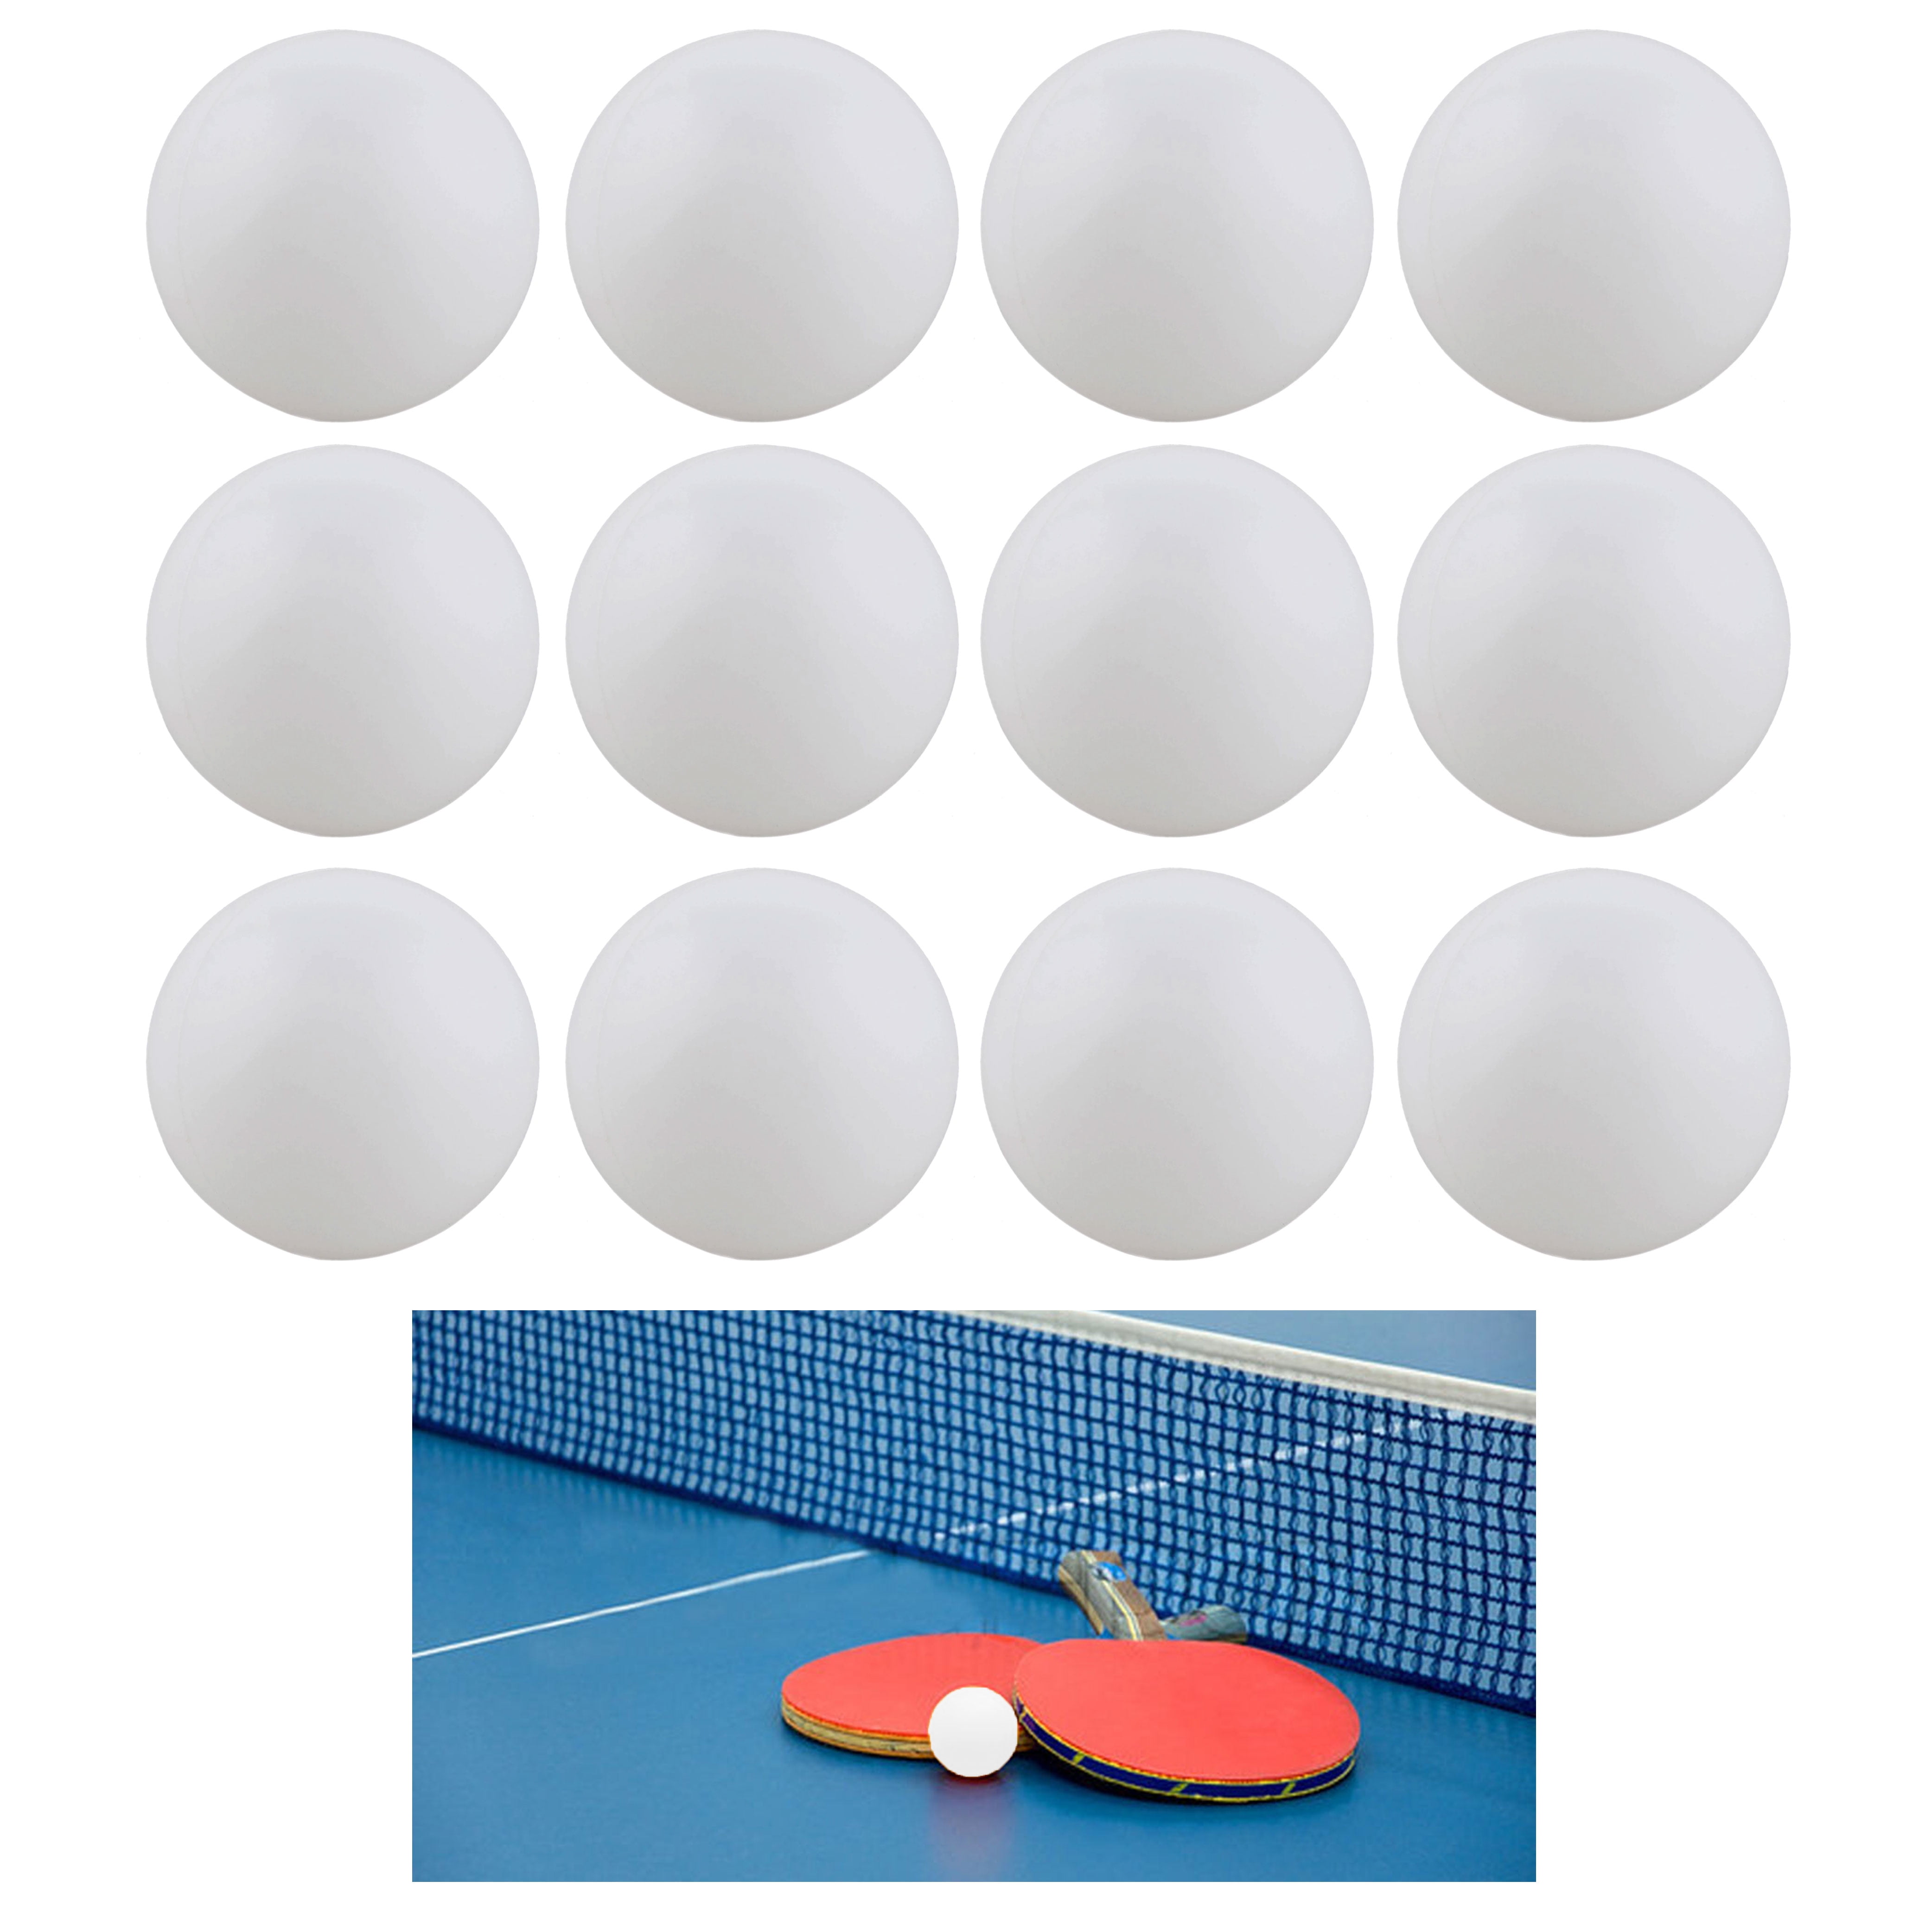 Ping Pong Balls Pack of 12 